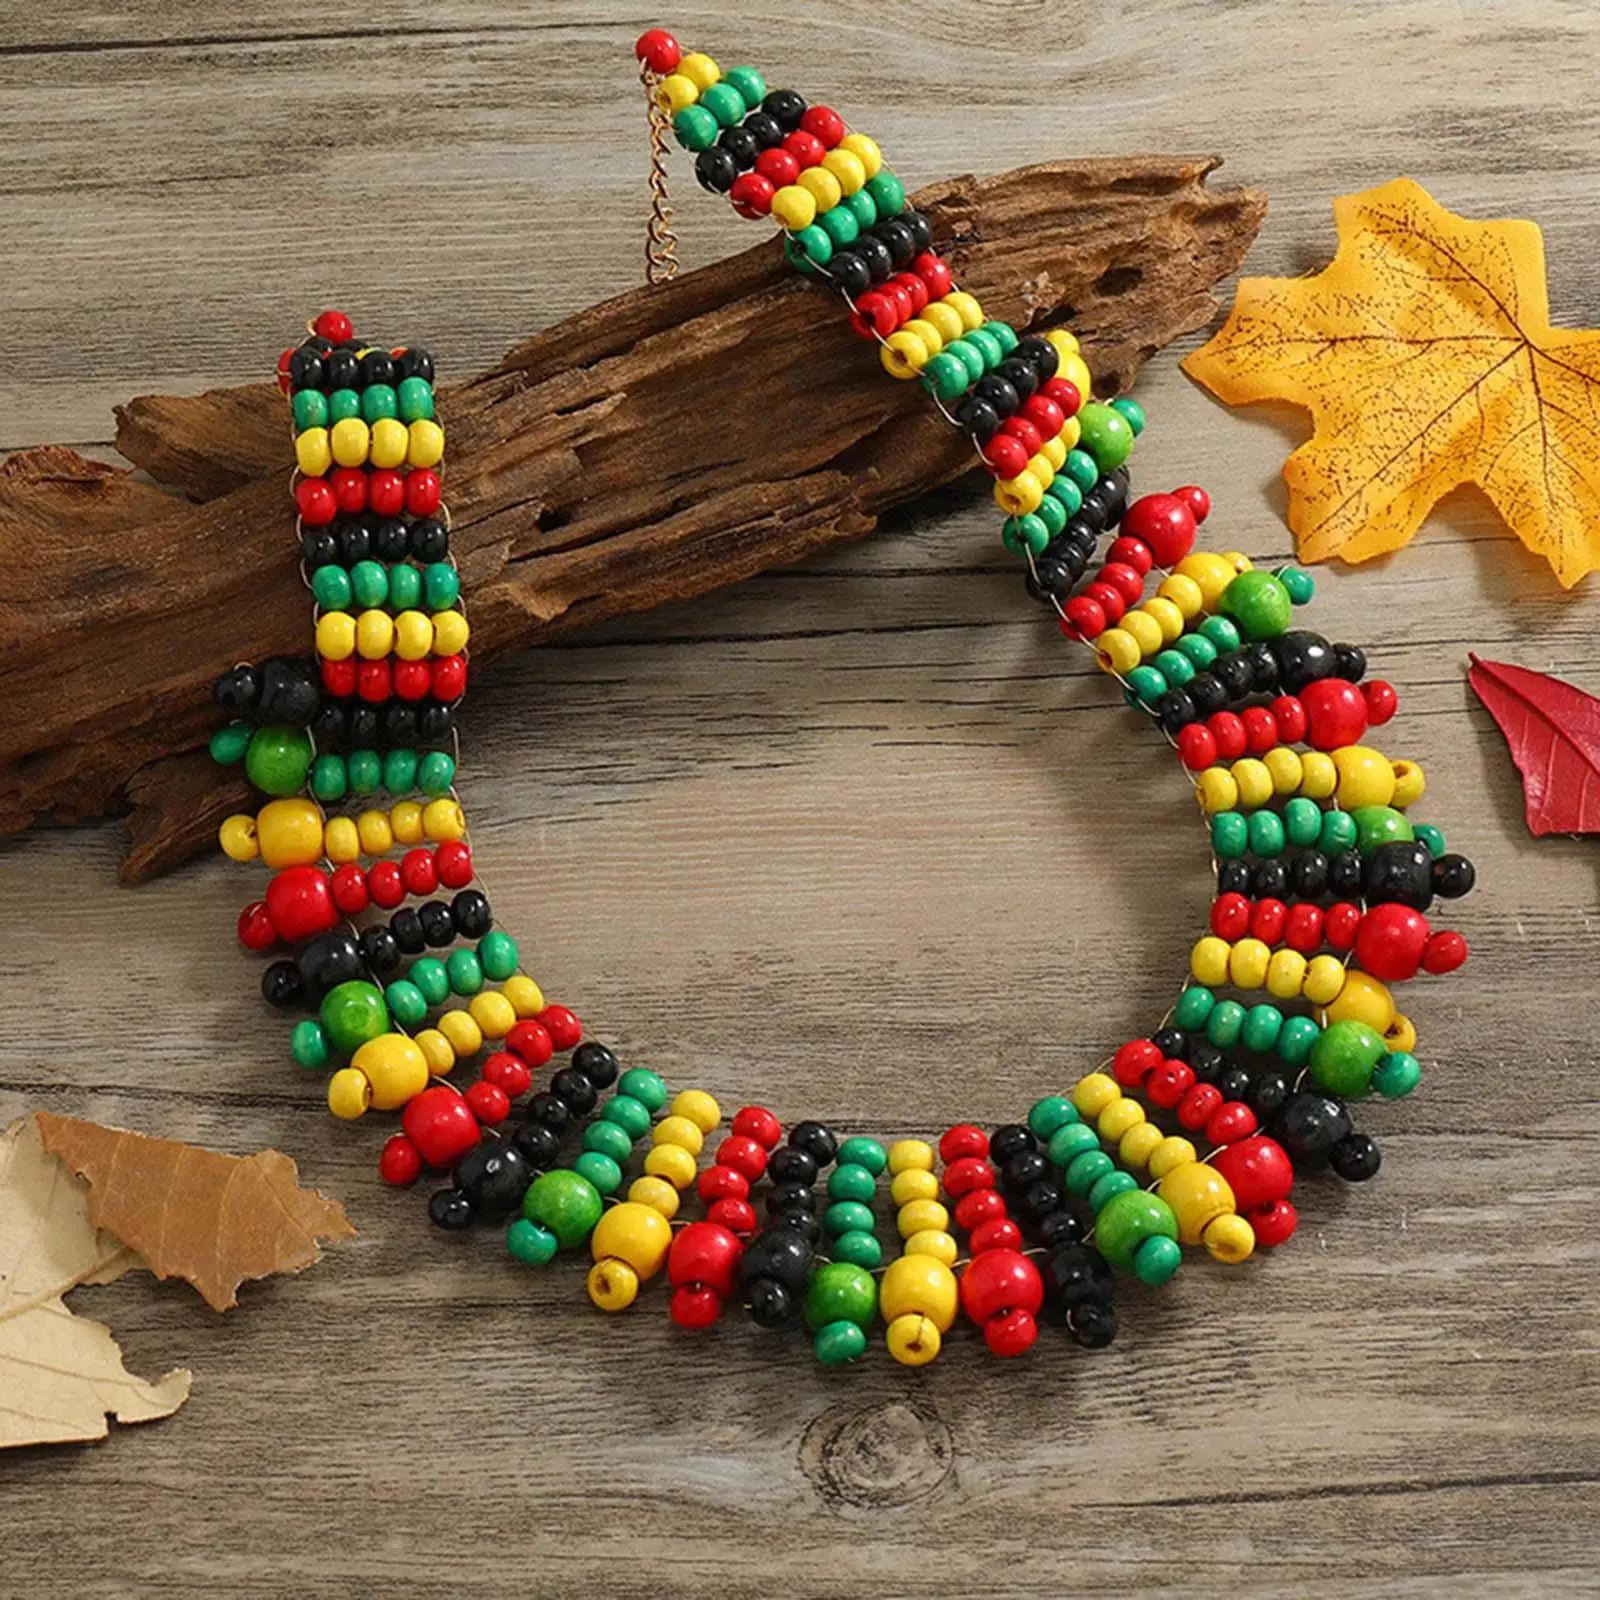 Boho Beaded Choker Necklace Statement Colorful Chunky African Beads Gift Layered Collar Necklace Jewelry Women